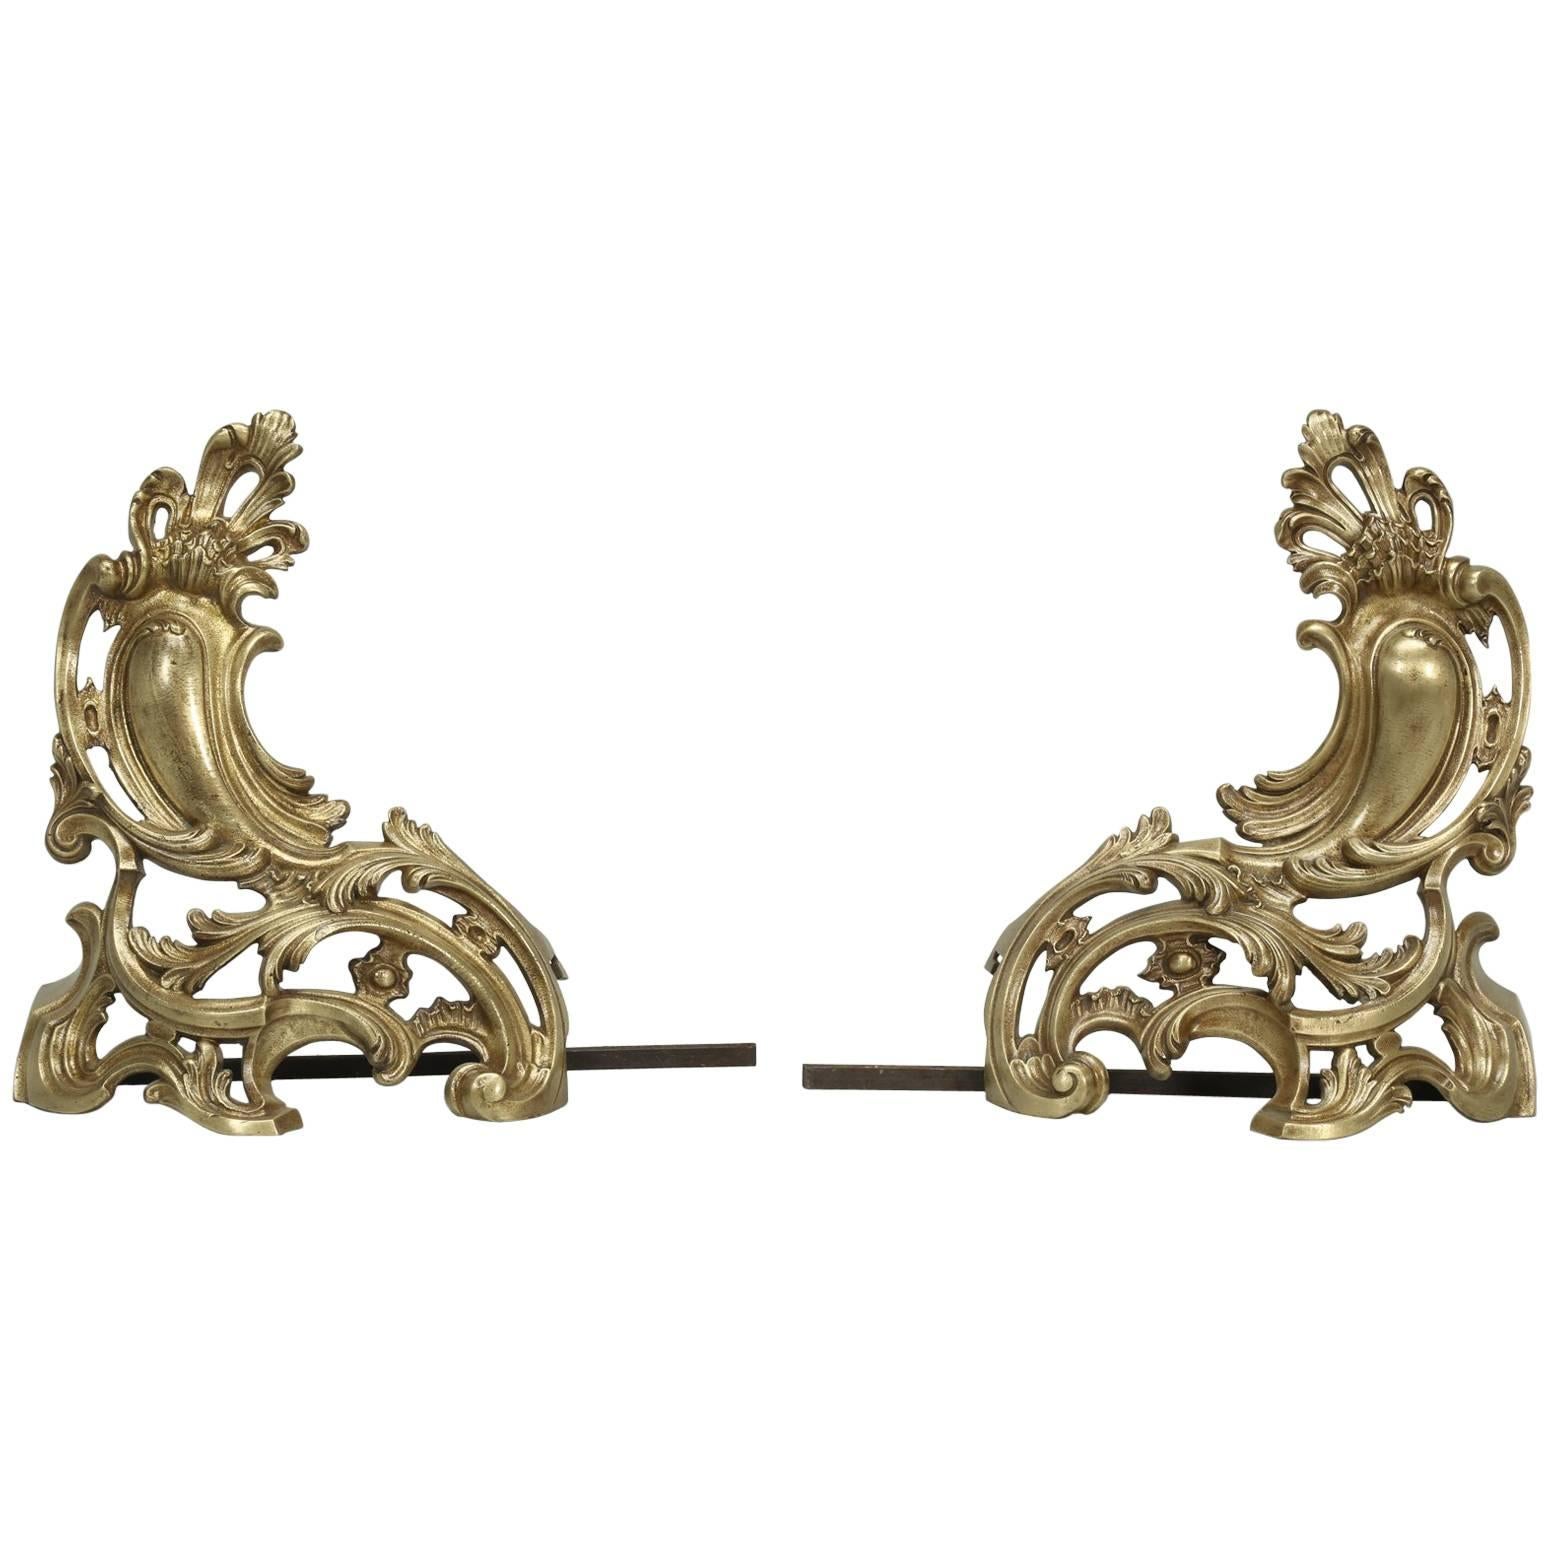 Antique French Solid Bronze Andirons or Chenets in a Rococo Style 